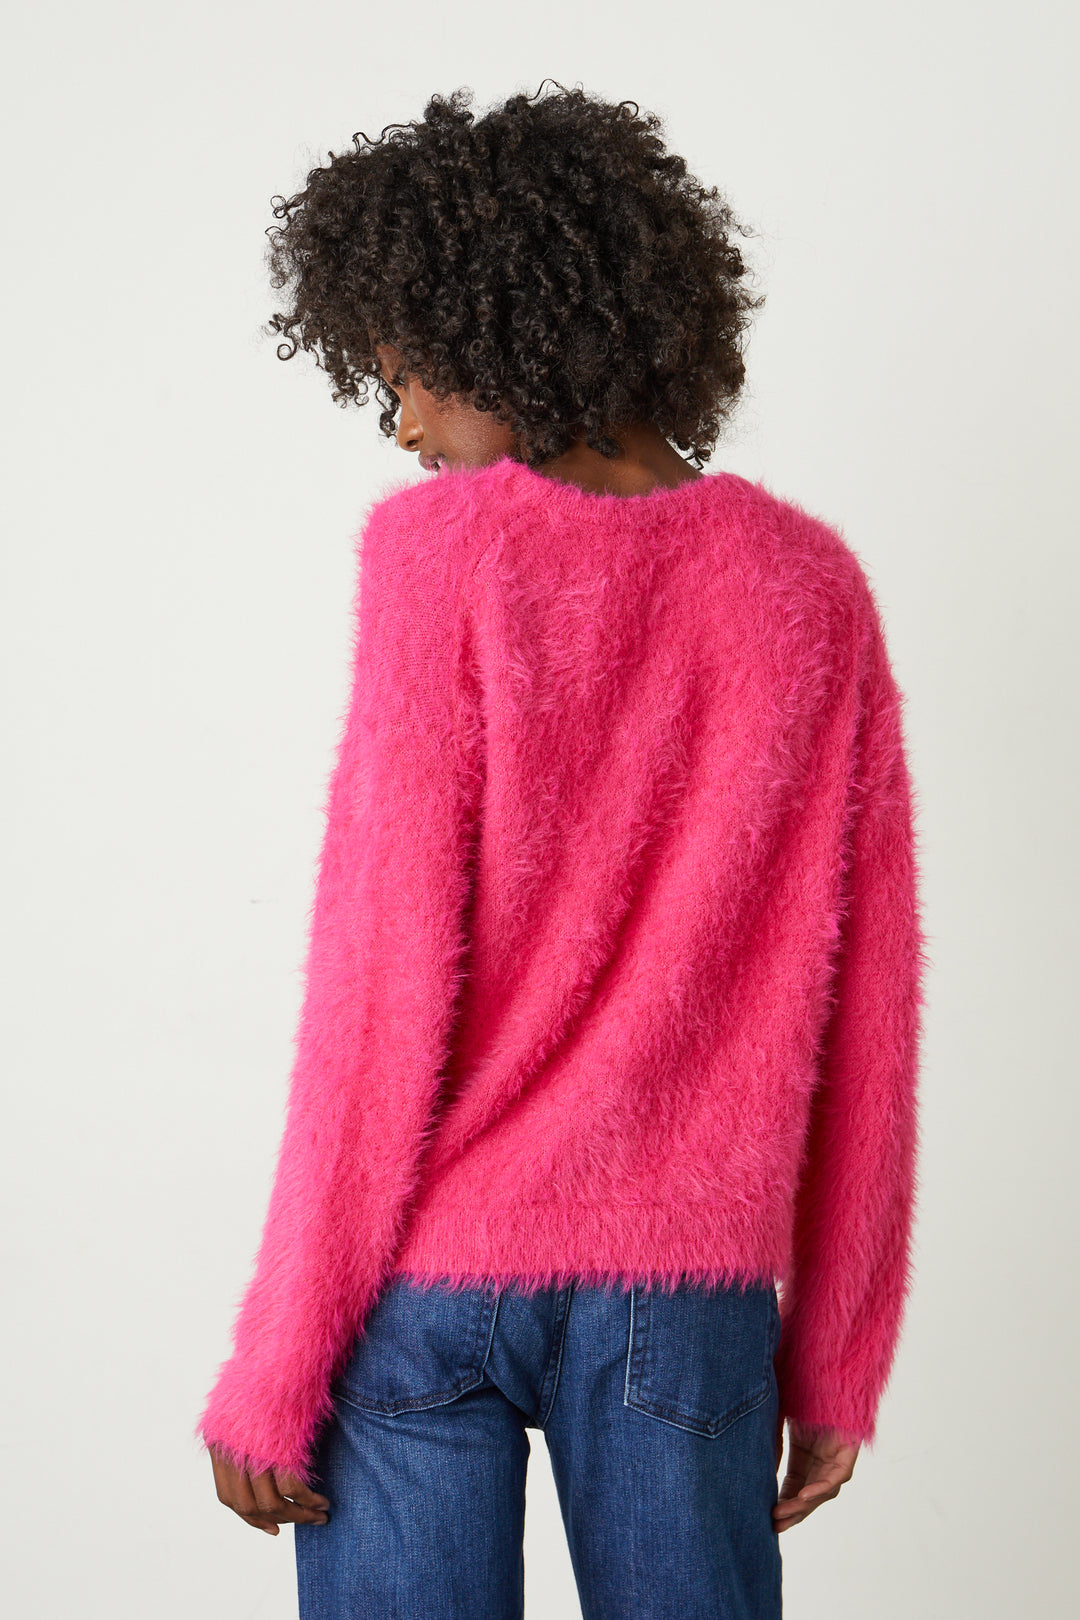 RAY FEATHER YARN SWEATER (HOT PINK) - VELVET